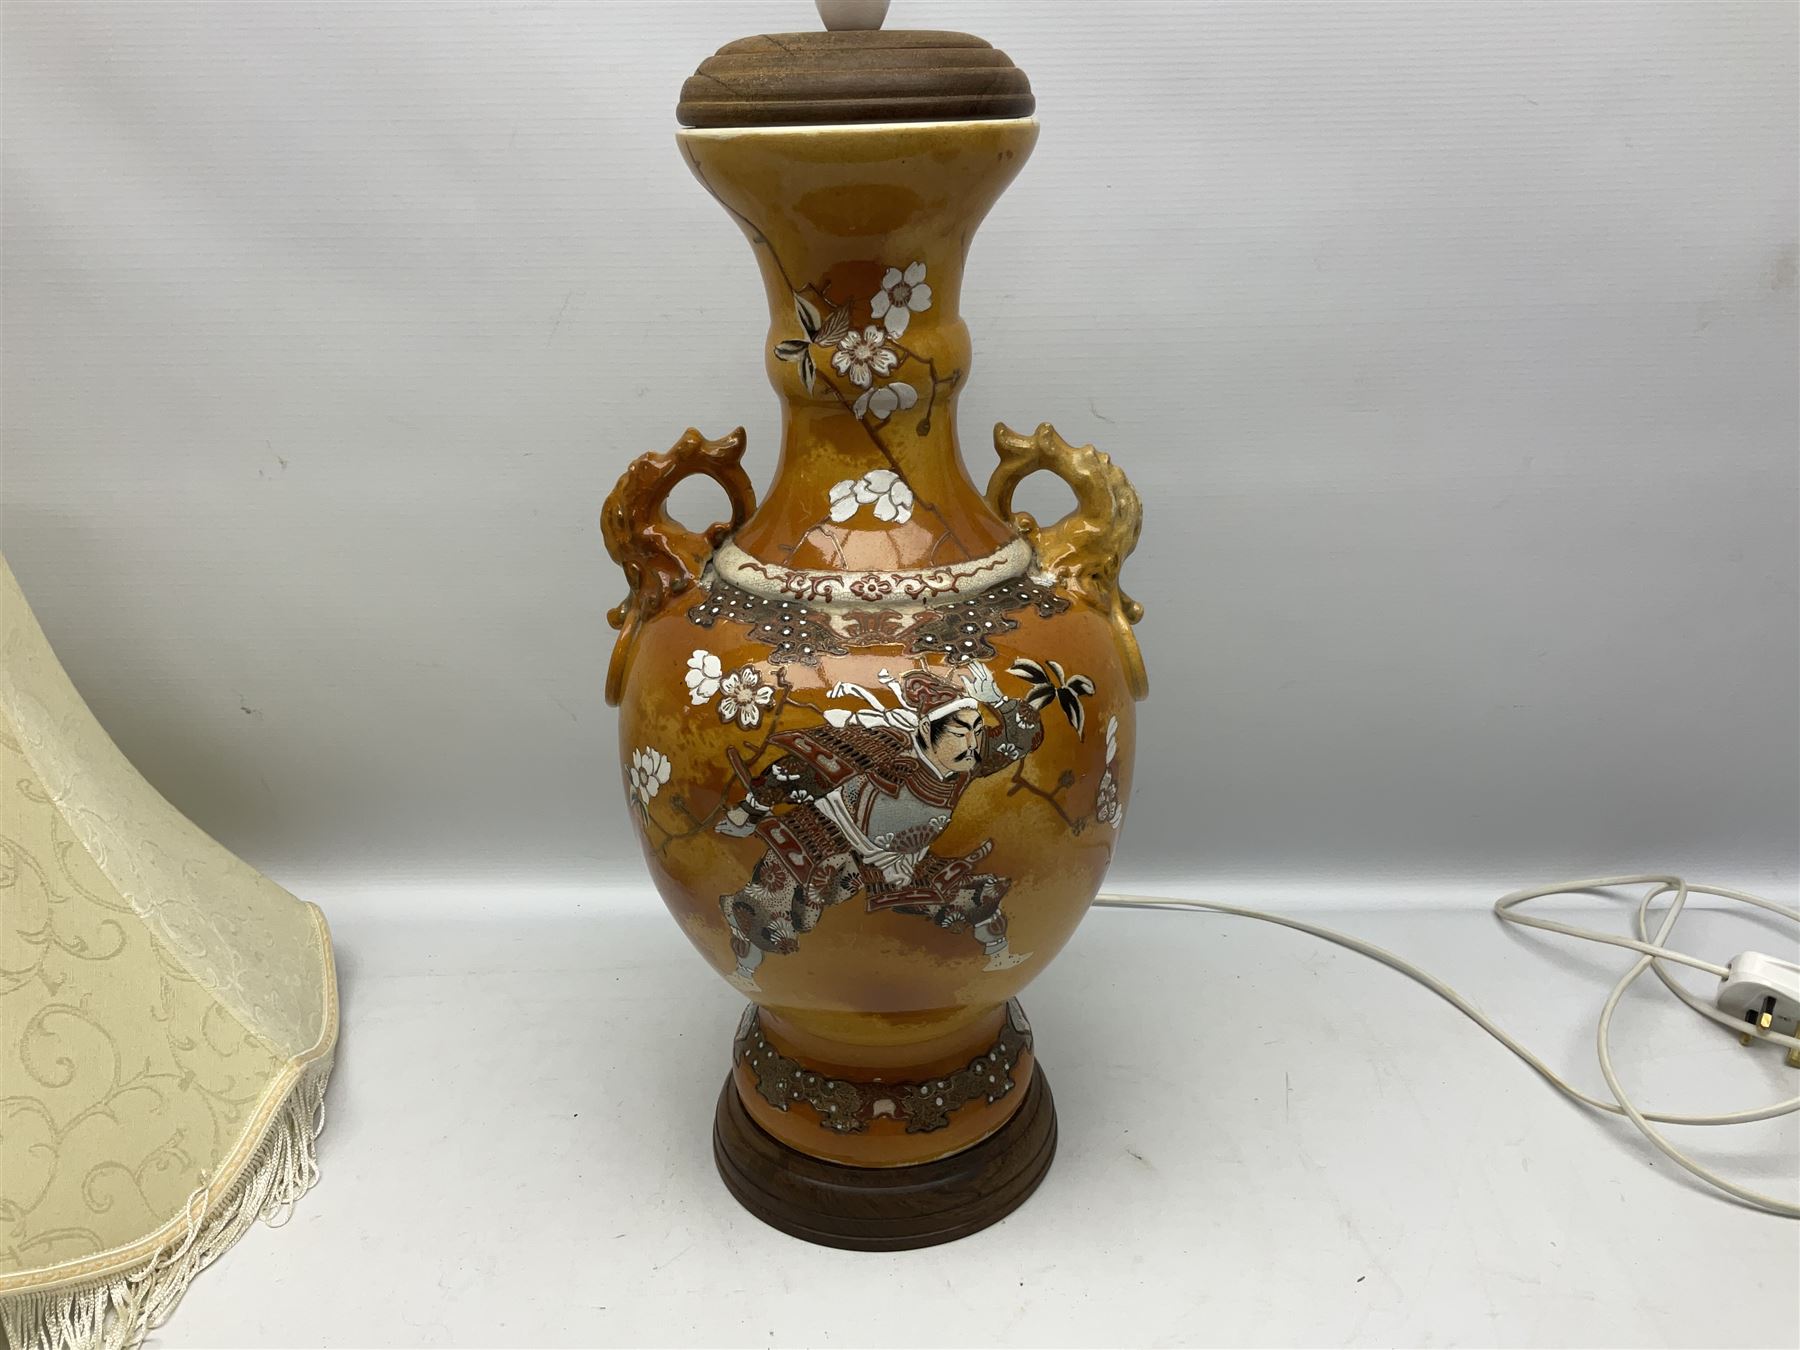 20th century Japanese vase converted to a lamp - Image 5 of 6